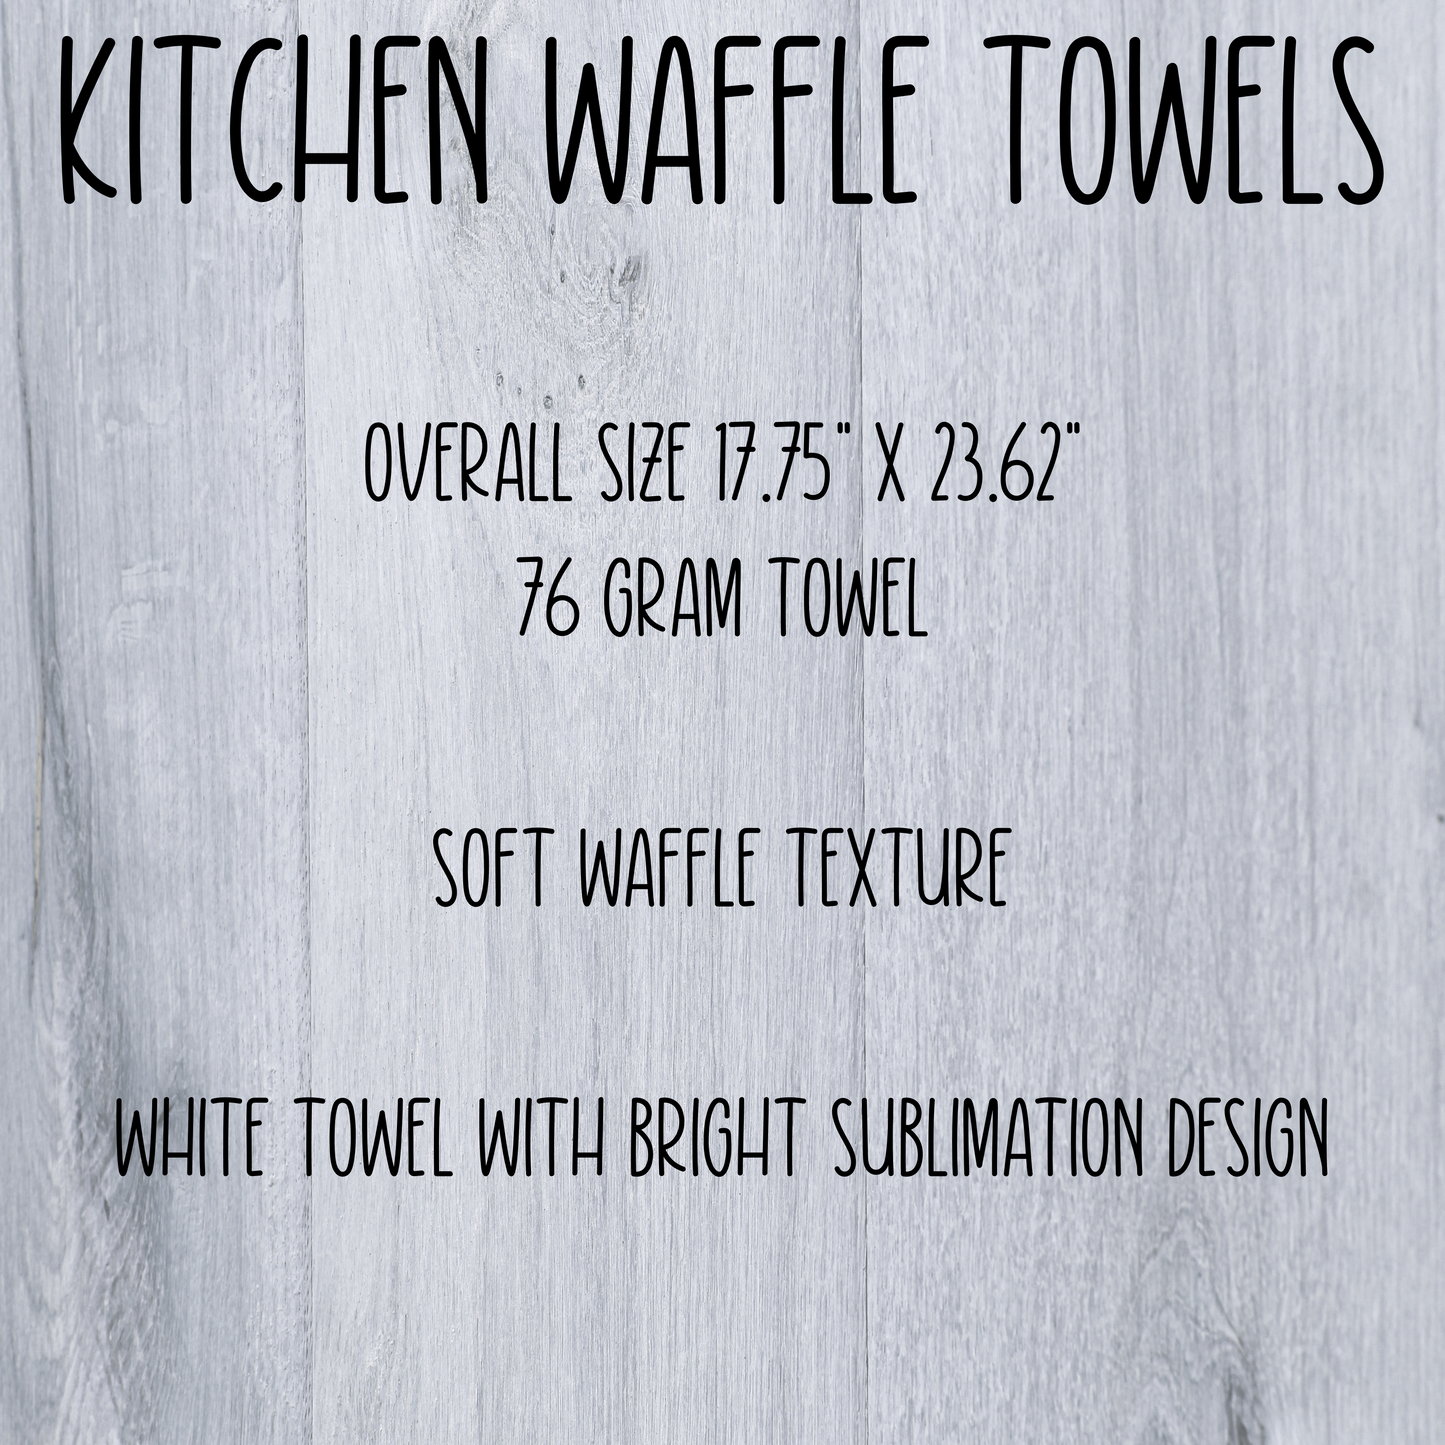 Your Option is Not Part of the Recipe - Vintage Style Kitchen Waffle Towel